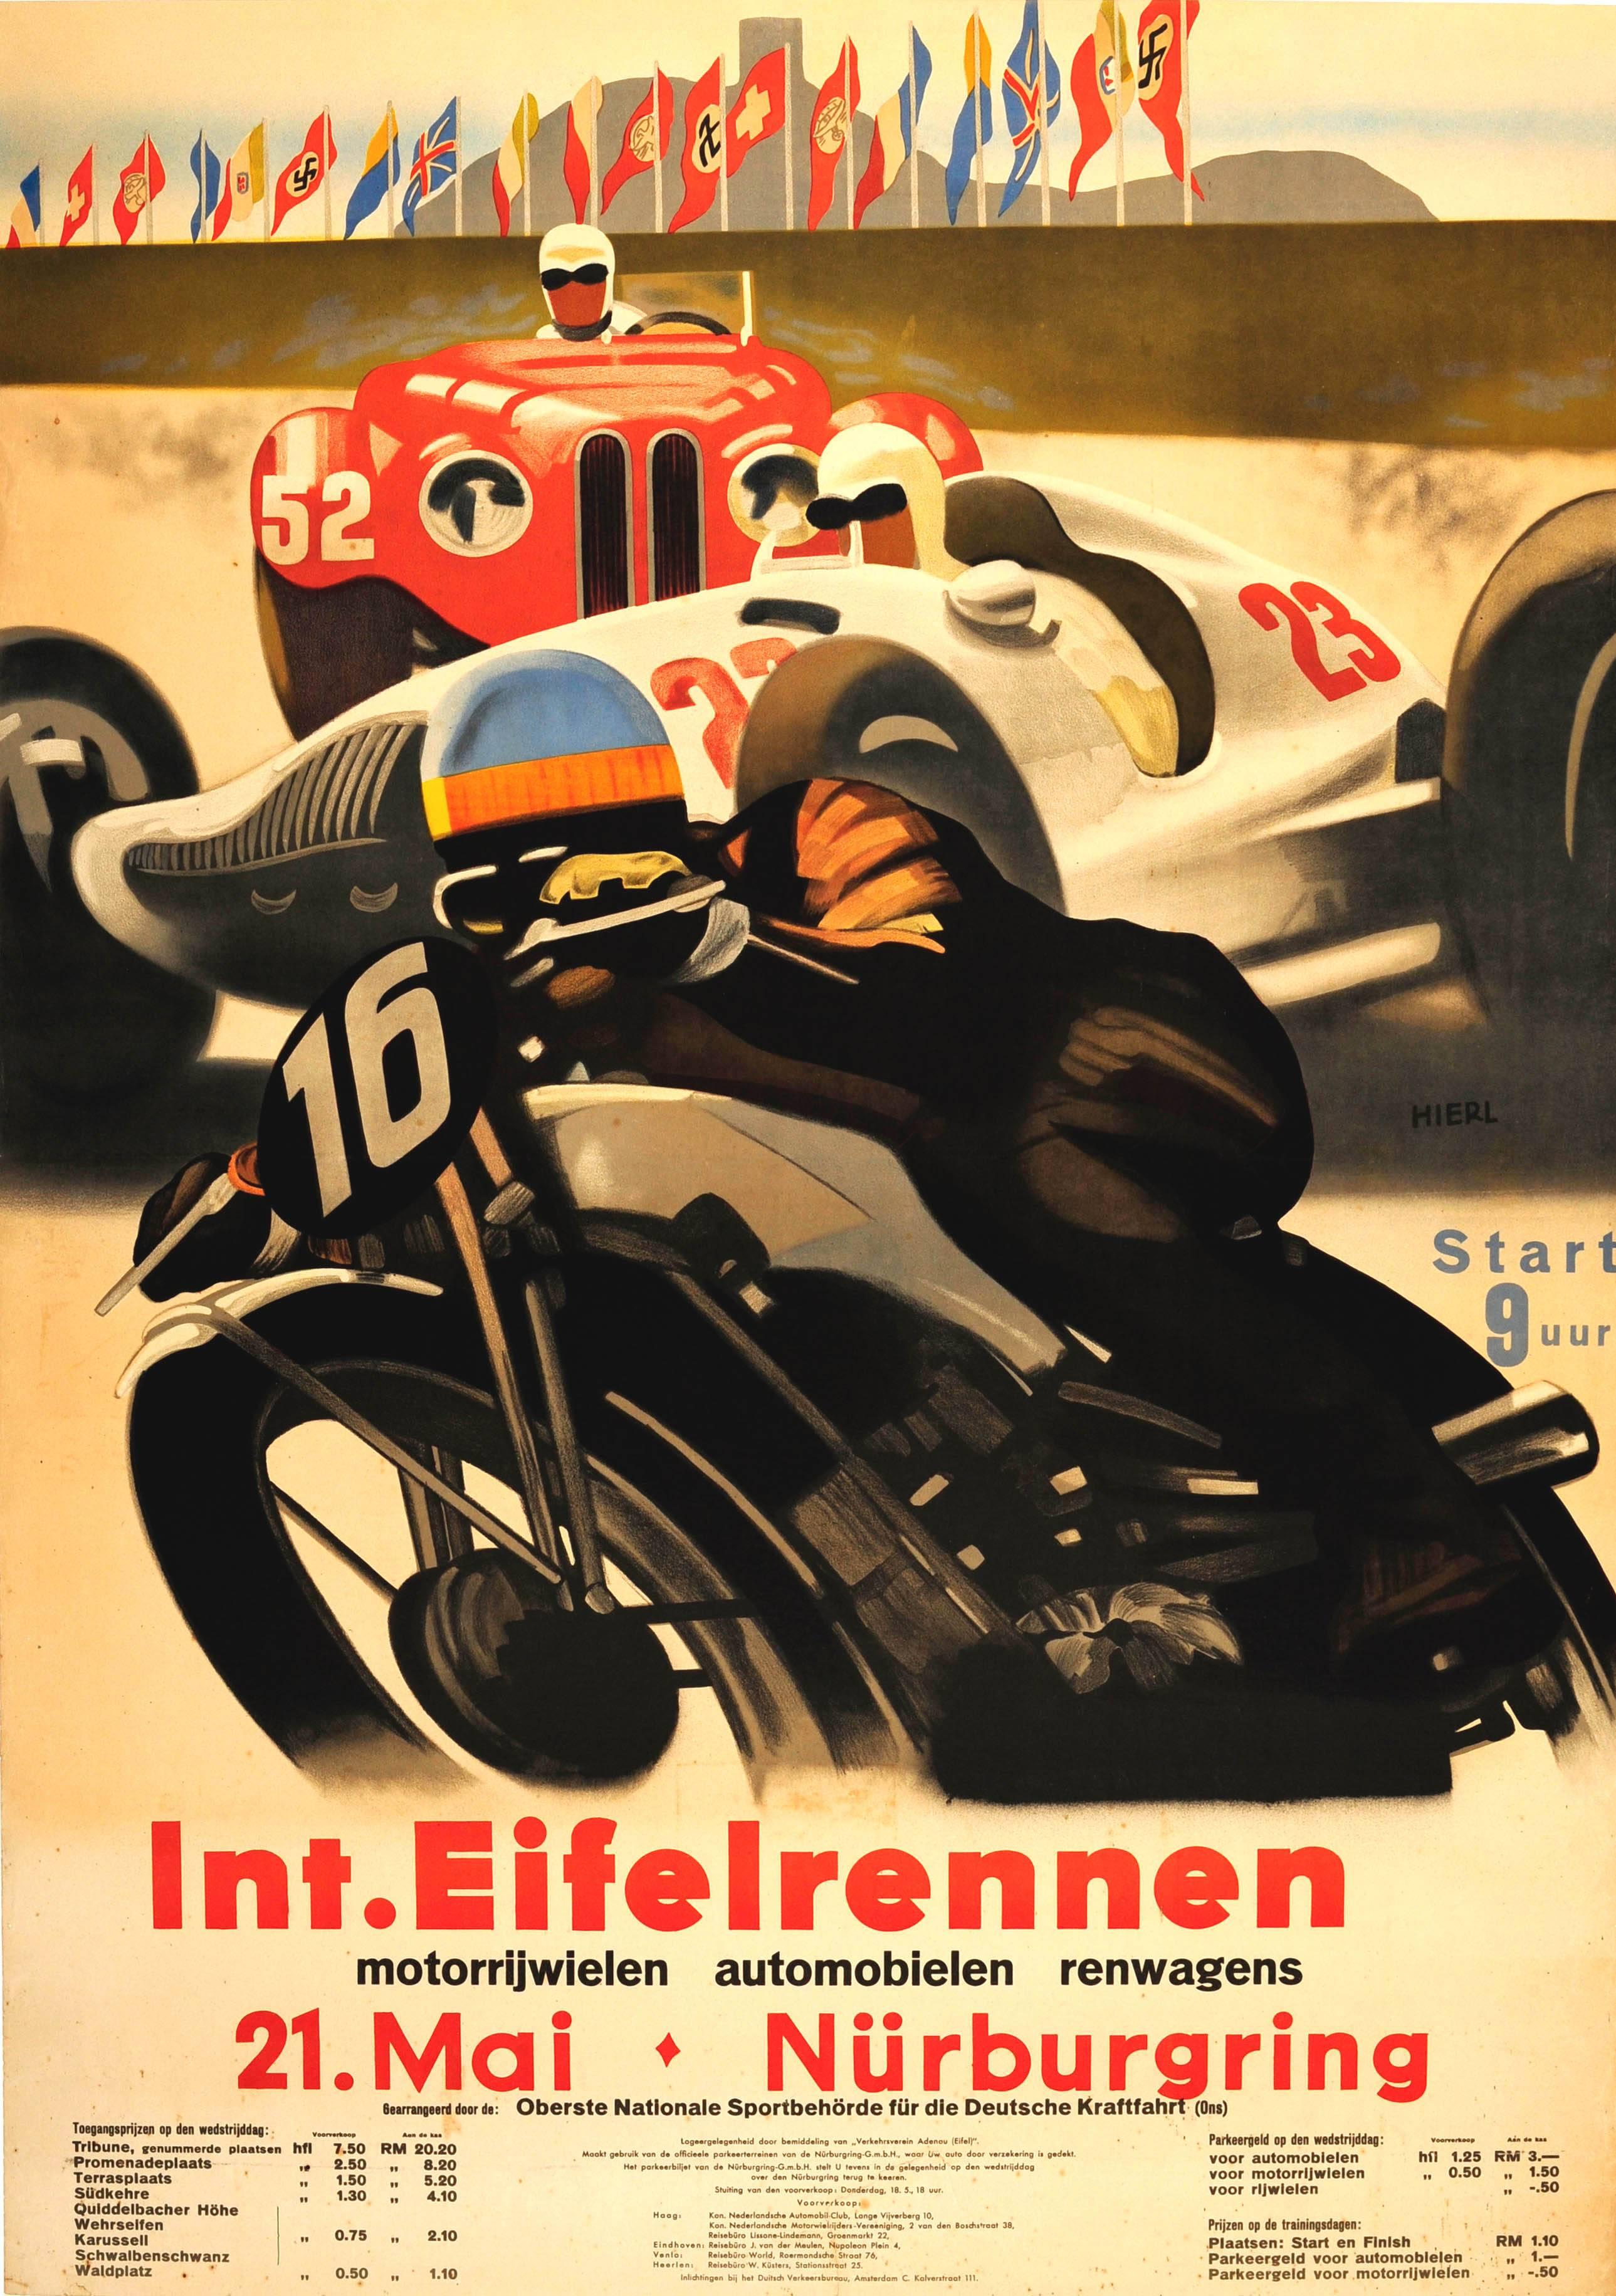 Alfred Hierl Print - Original Car And Motorcycle Racing Poster For The Int. Eifelrennen Nurburgring